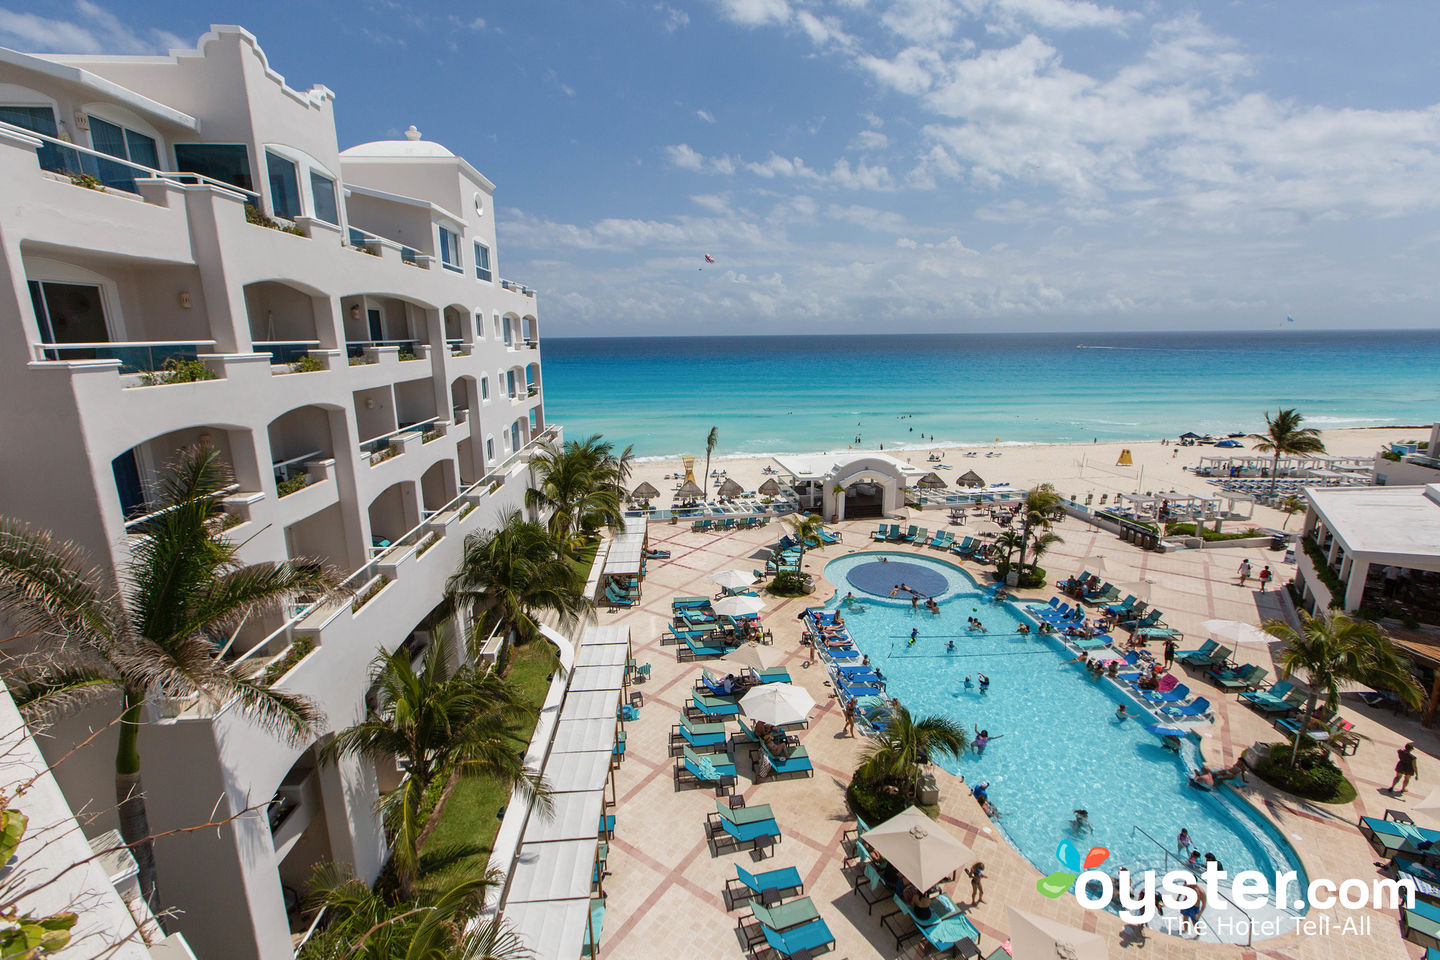 pagar taquigrafía mosquito Panama Jack Resorts Cancun Review: What To REALLY Expect If You Stay